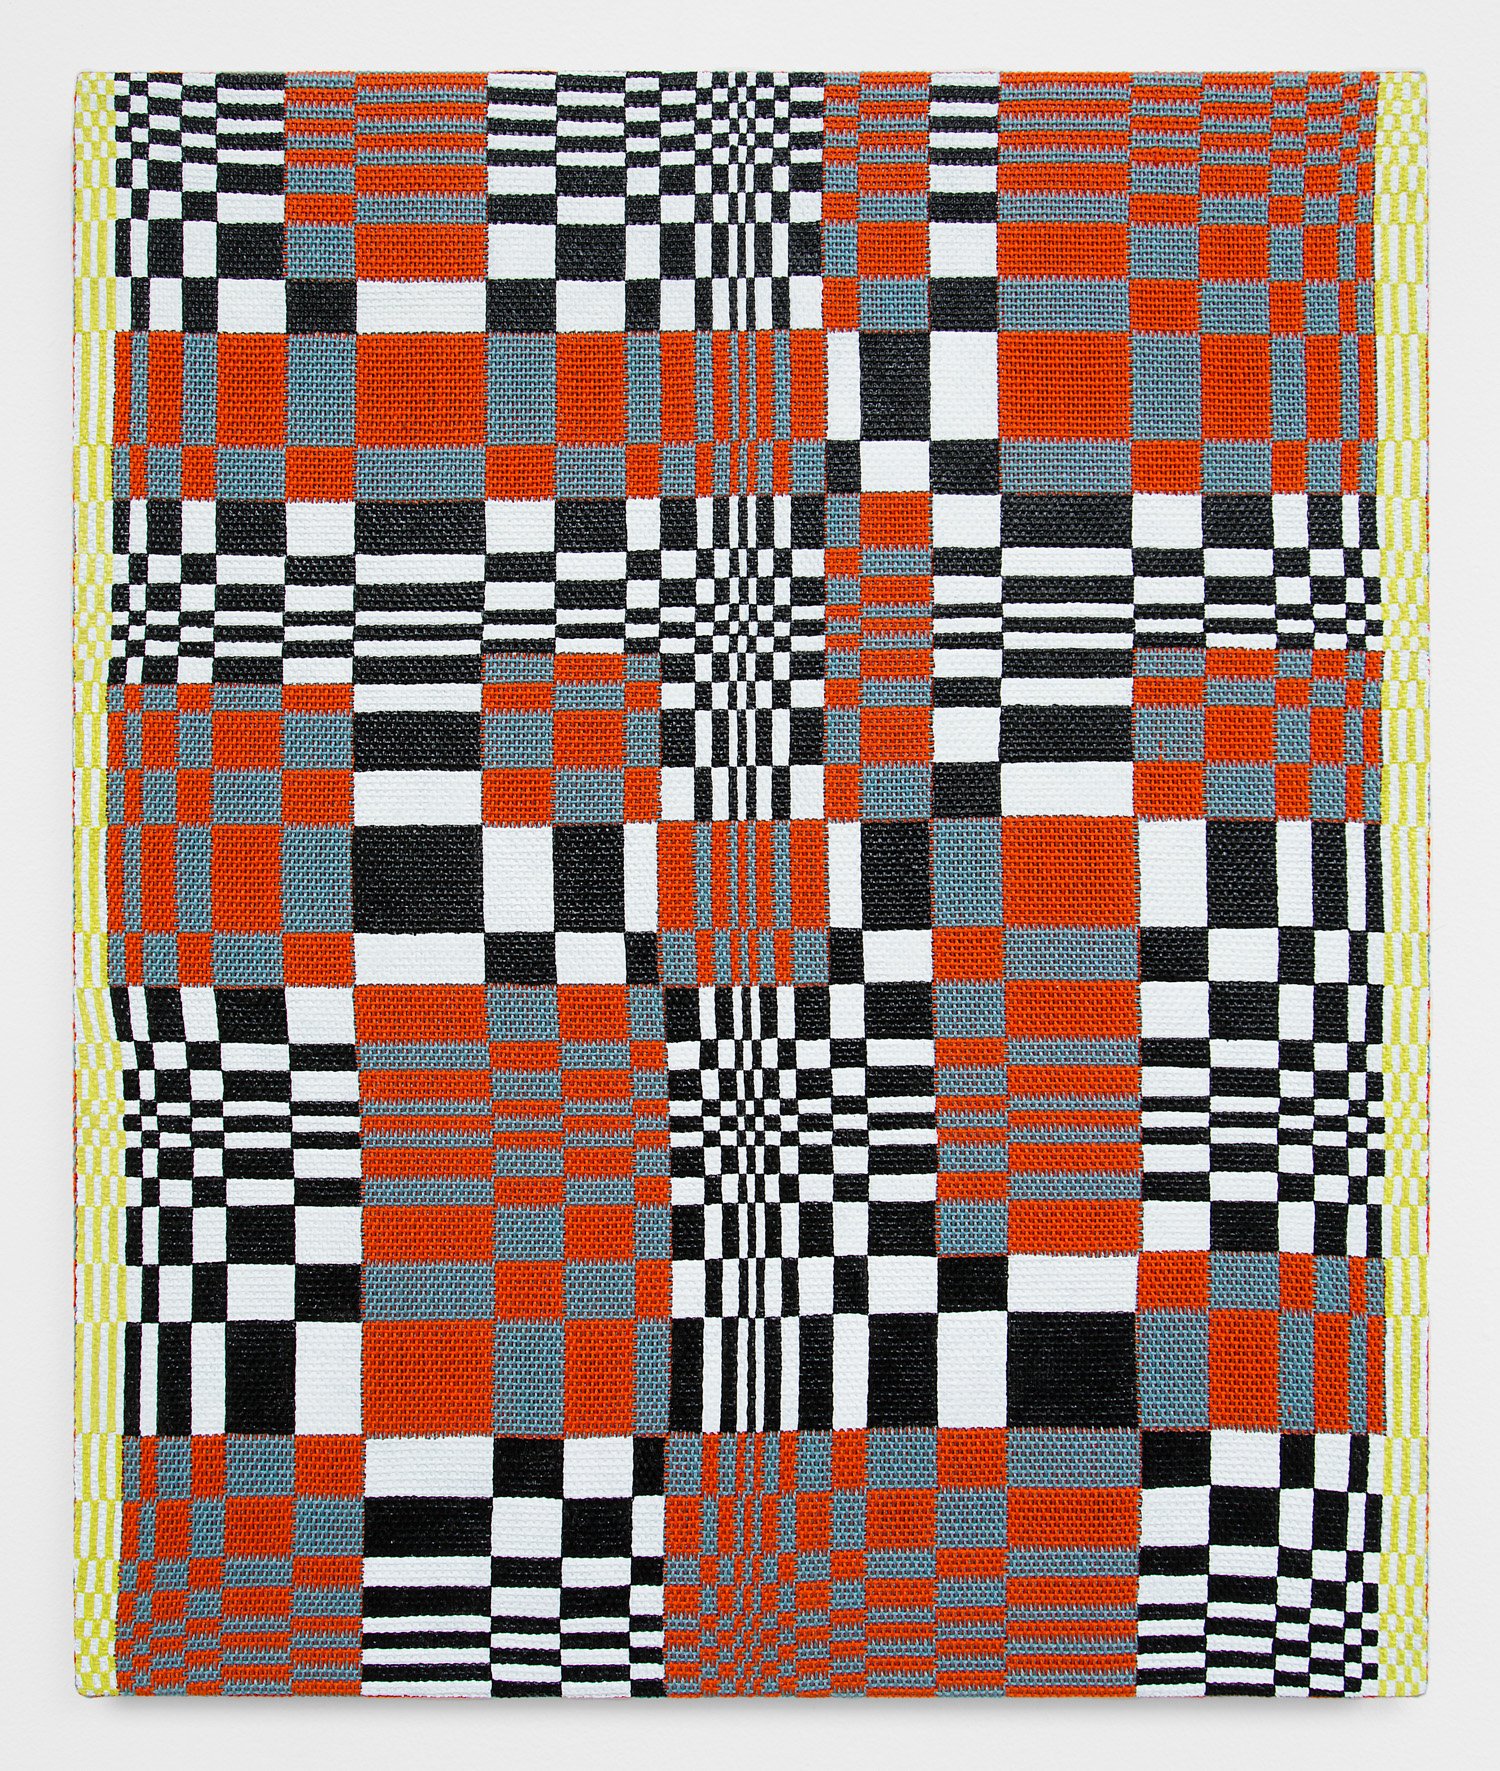   Samantha Bittman ,&nbsp; Untitled , 2021,&nbsp;acrylic on hand-woven textile,&nbsp;24 x 20 in. (61 x 50.8 cm). Courtesy of the artist and Various Small Fires, Los Angeles / Dallas / Seoul. 